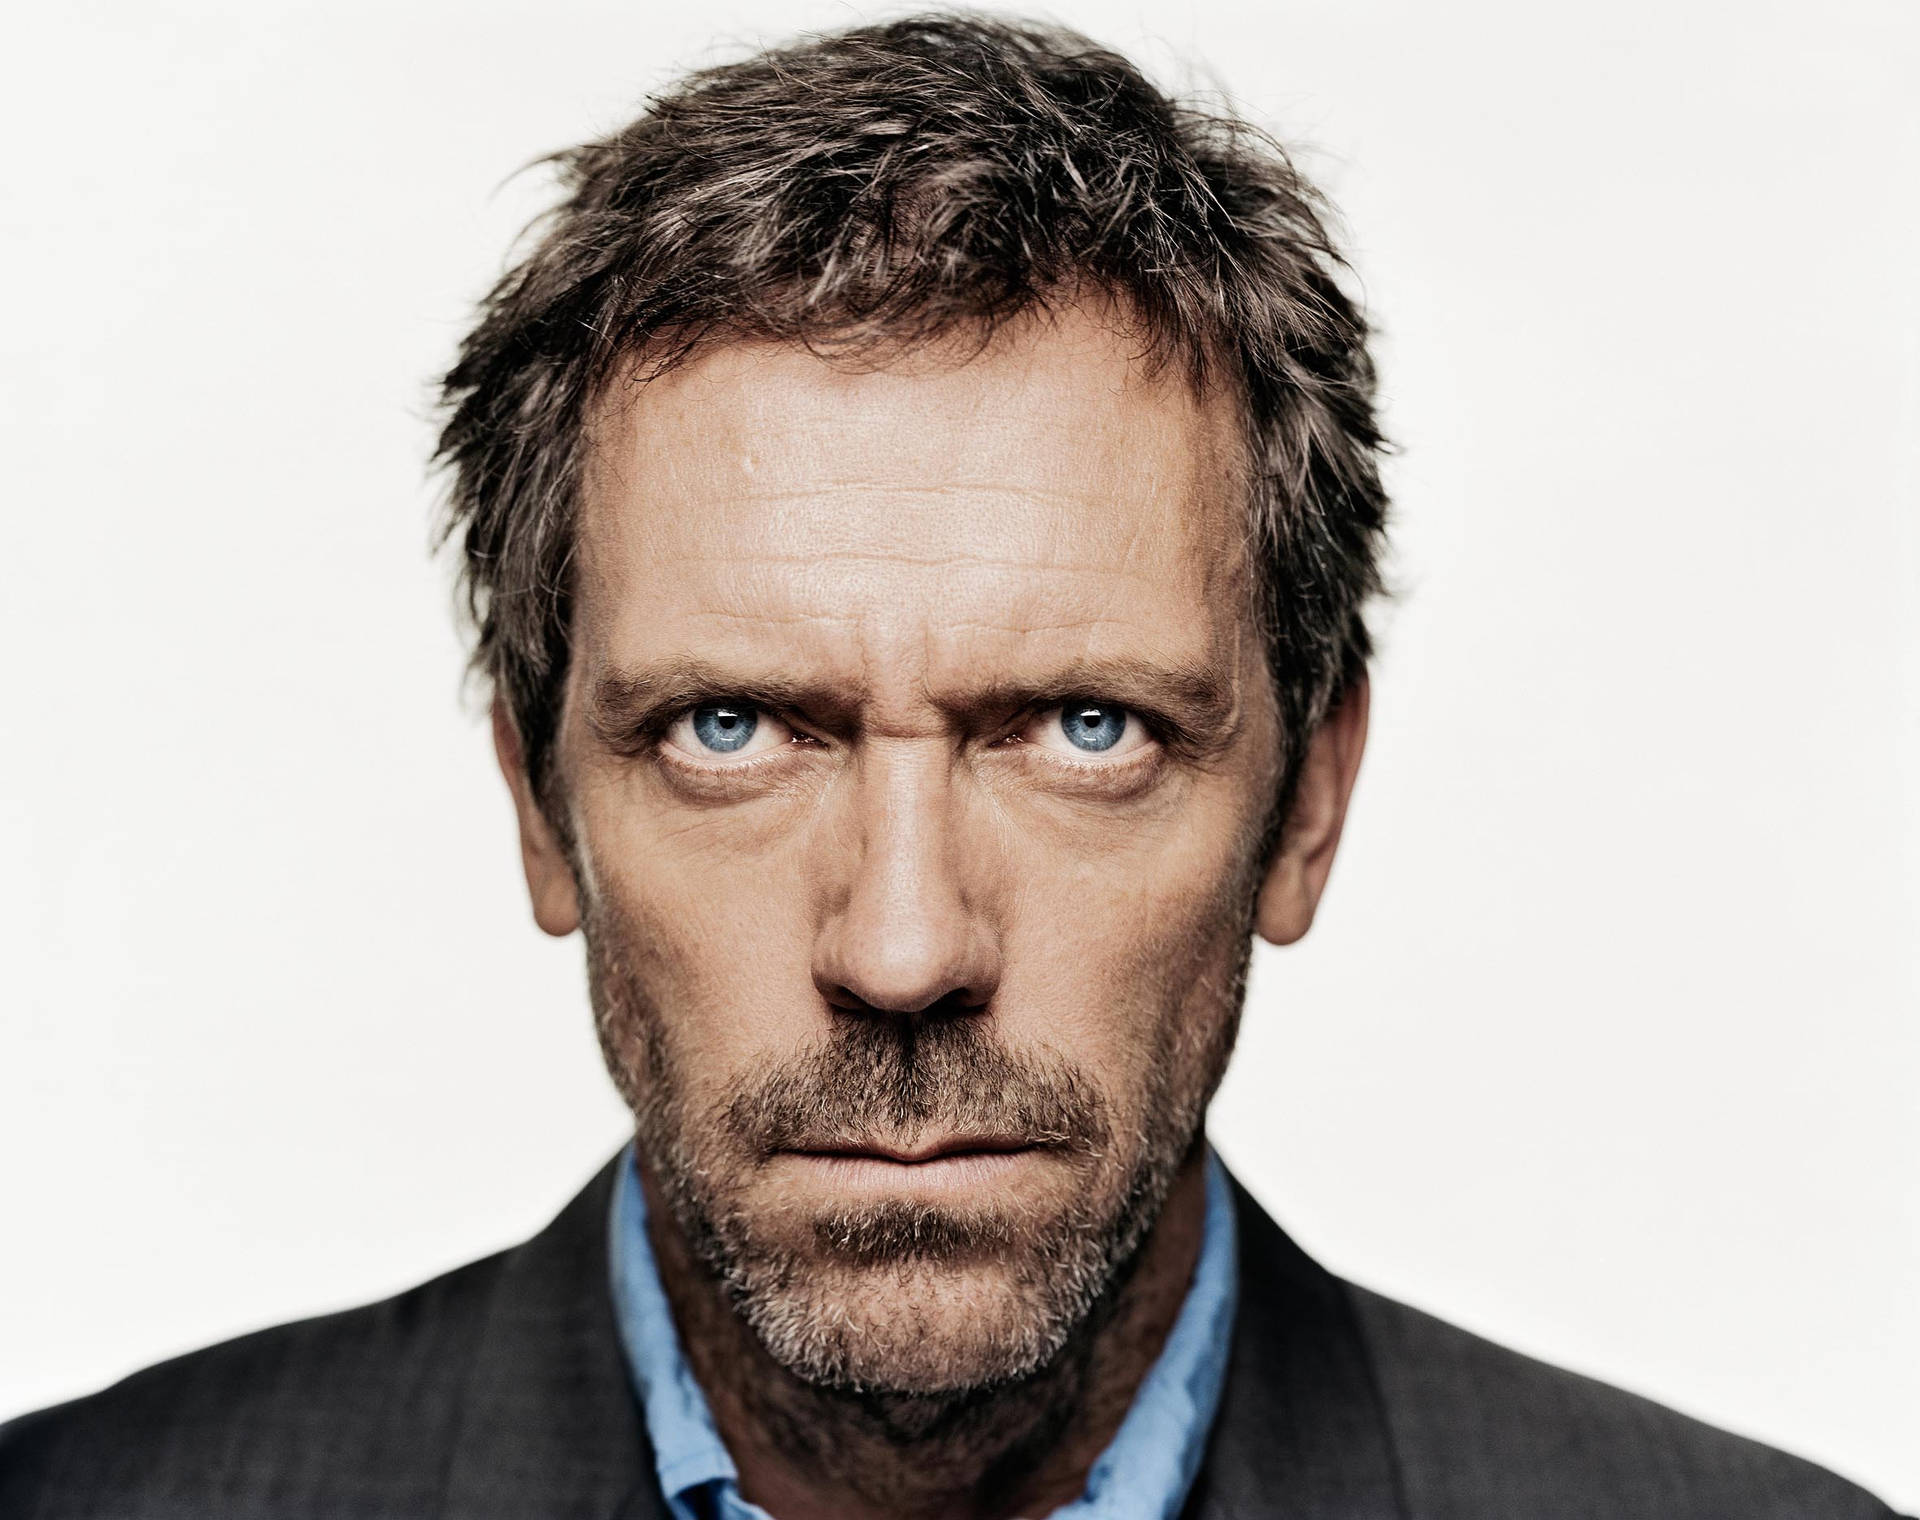 Intense Gaze Of Dr. House Md Background